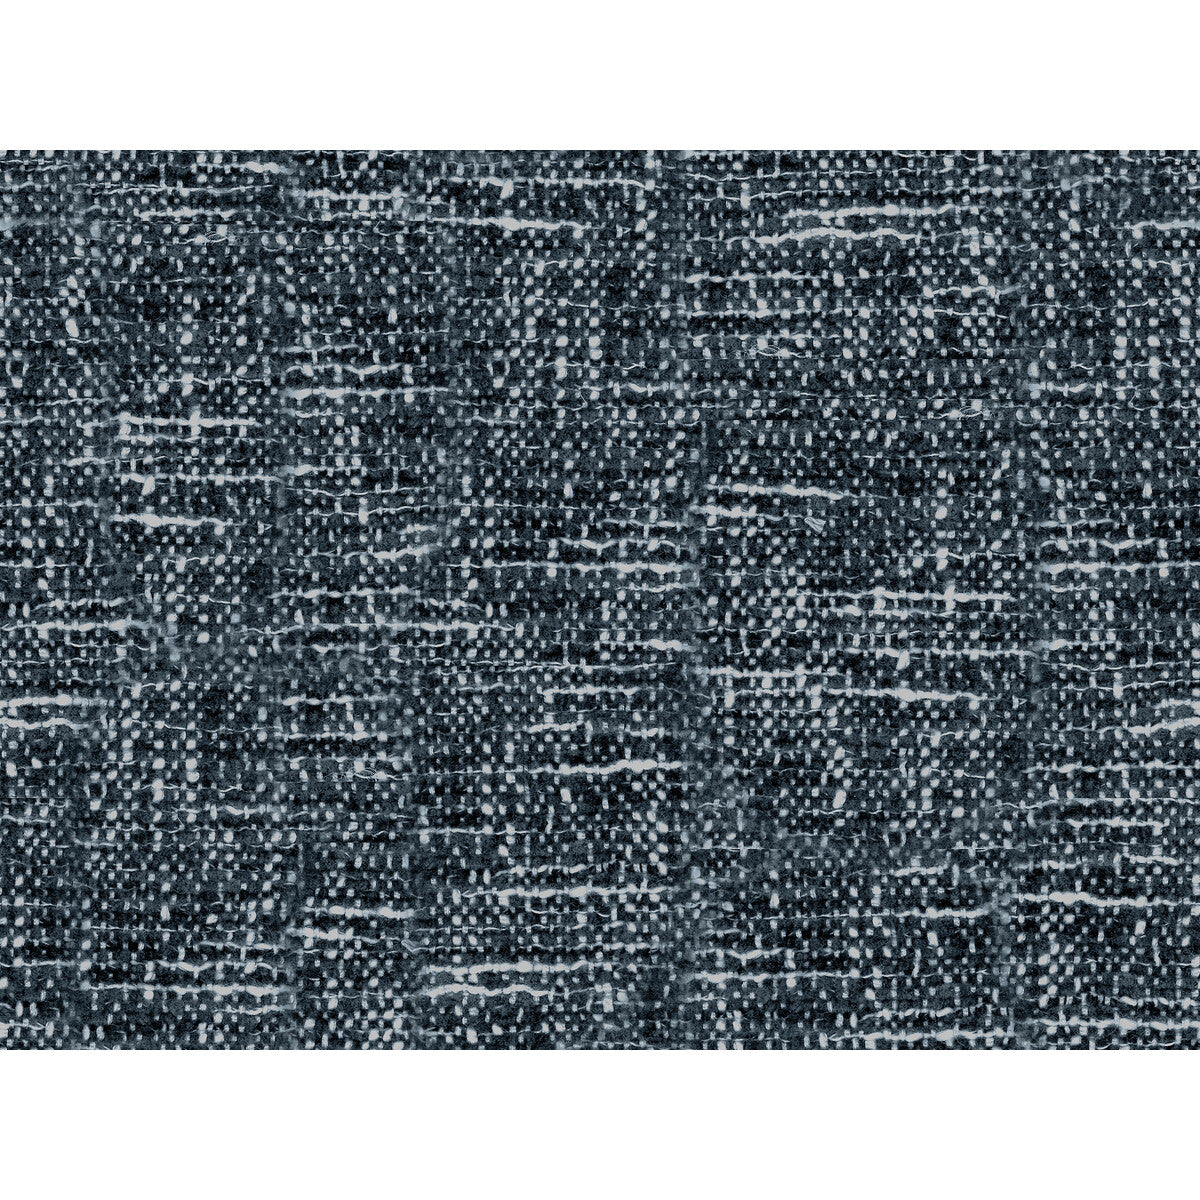 Tinge fabric in sapphire color - pattern GWF-3720.50.0 - by Lee Jofa Modern in the Kelly Wearstler Textures collection